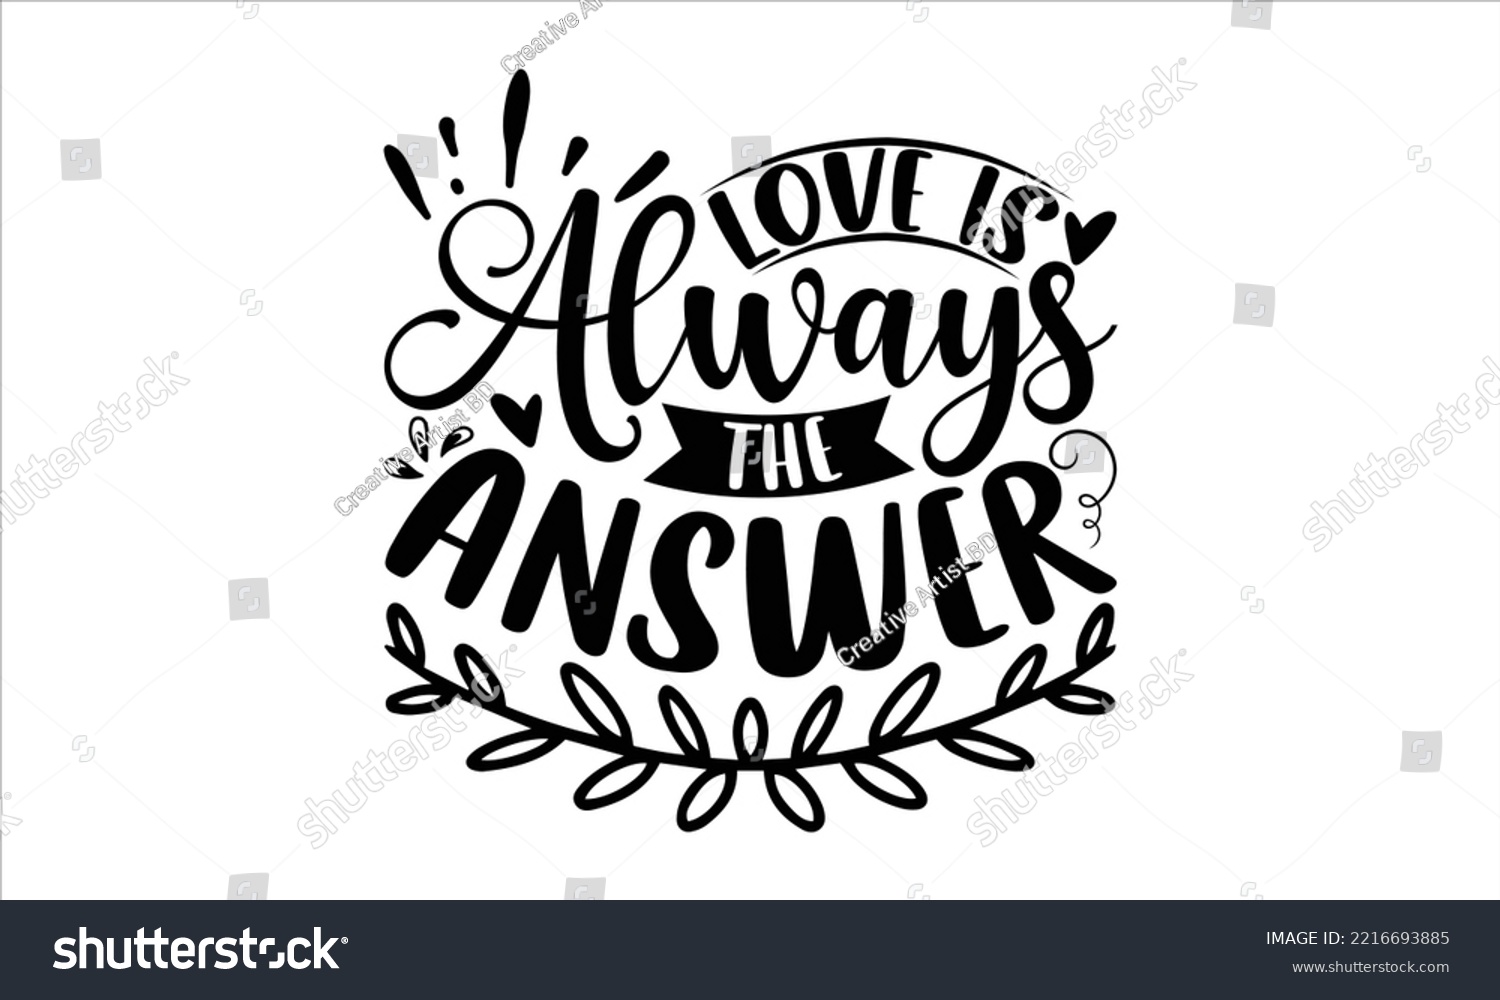 SVG of Love Is Always The Answer  - Happy Valentine's Day T shirt Design, Modern calligraphy, Cut Files for Cricut Svg, Illustration for prints on bags, posters svg